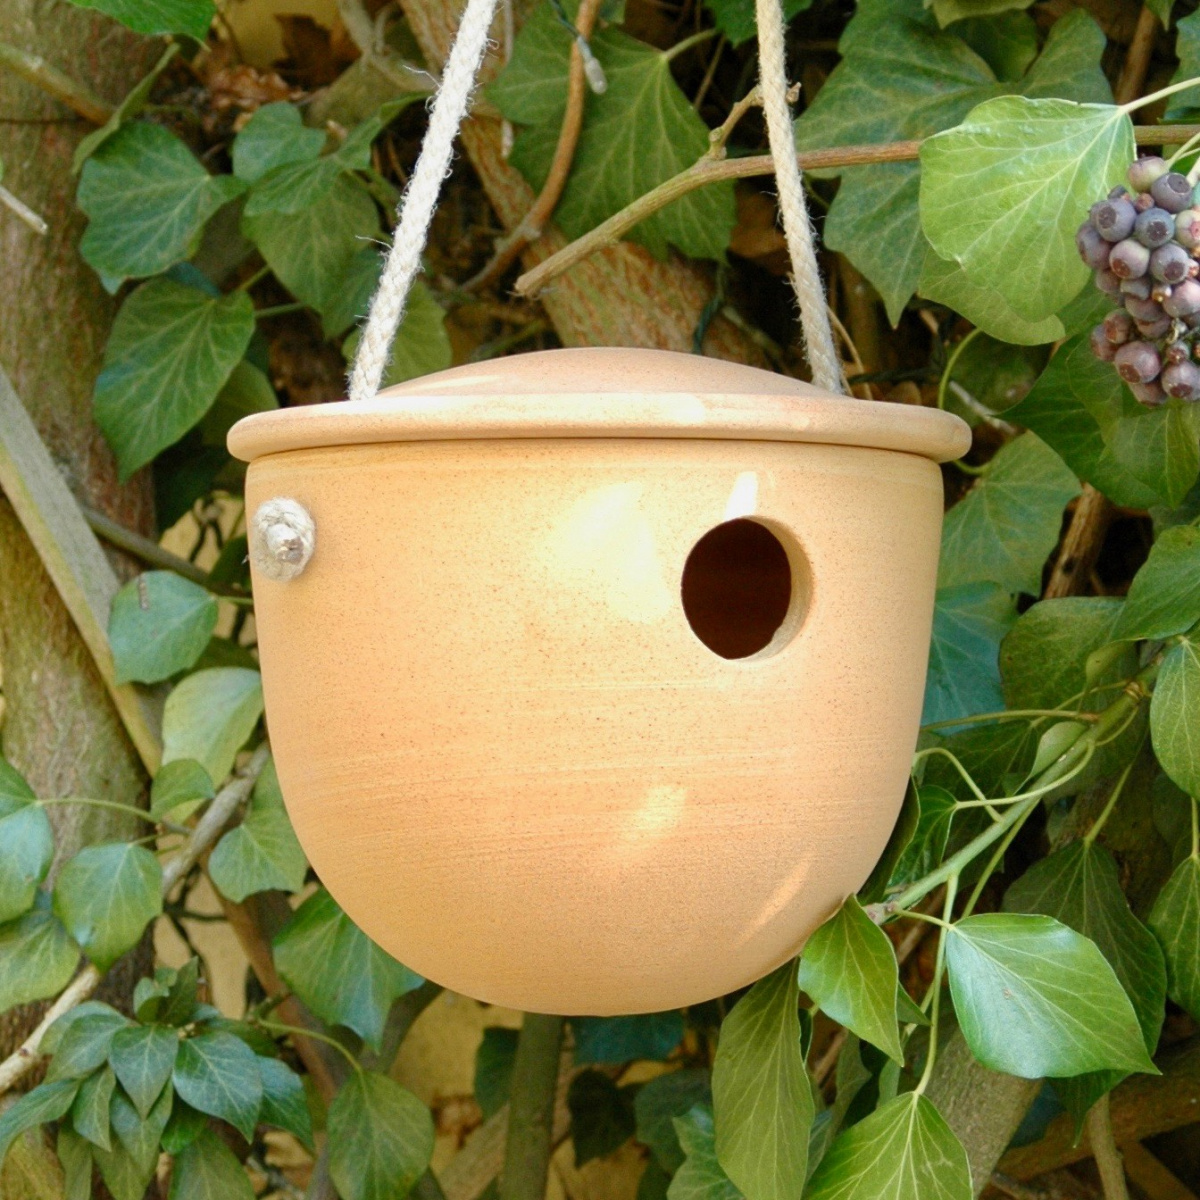 Denk nest box with rope